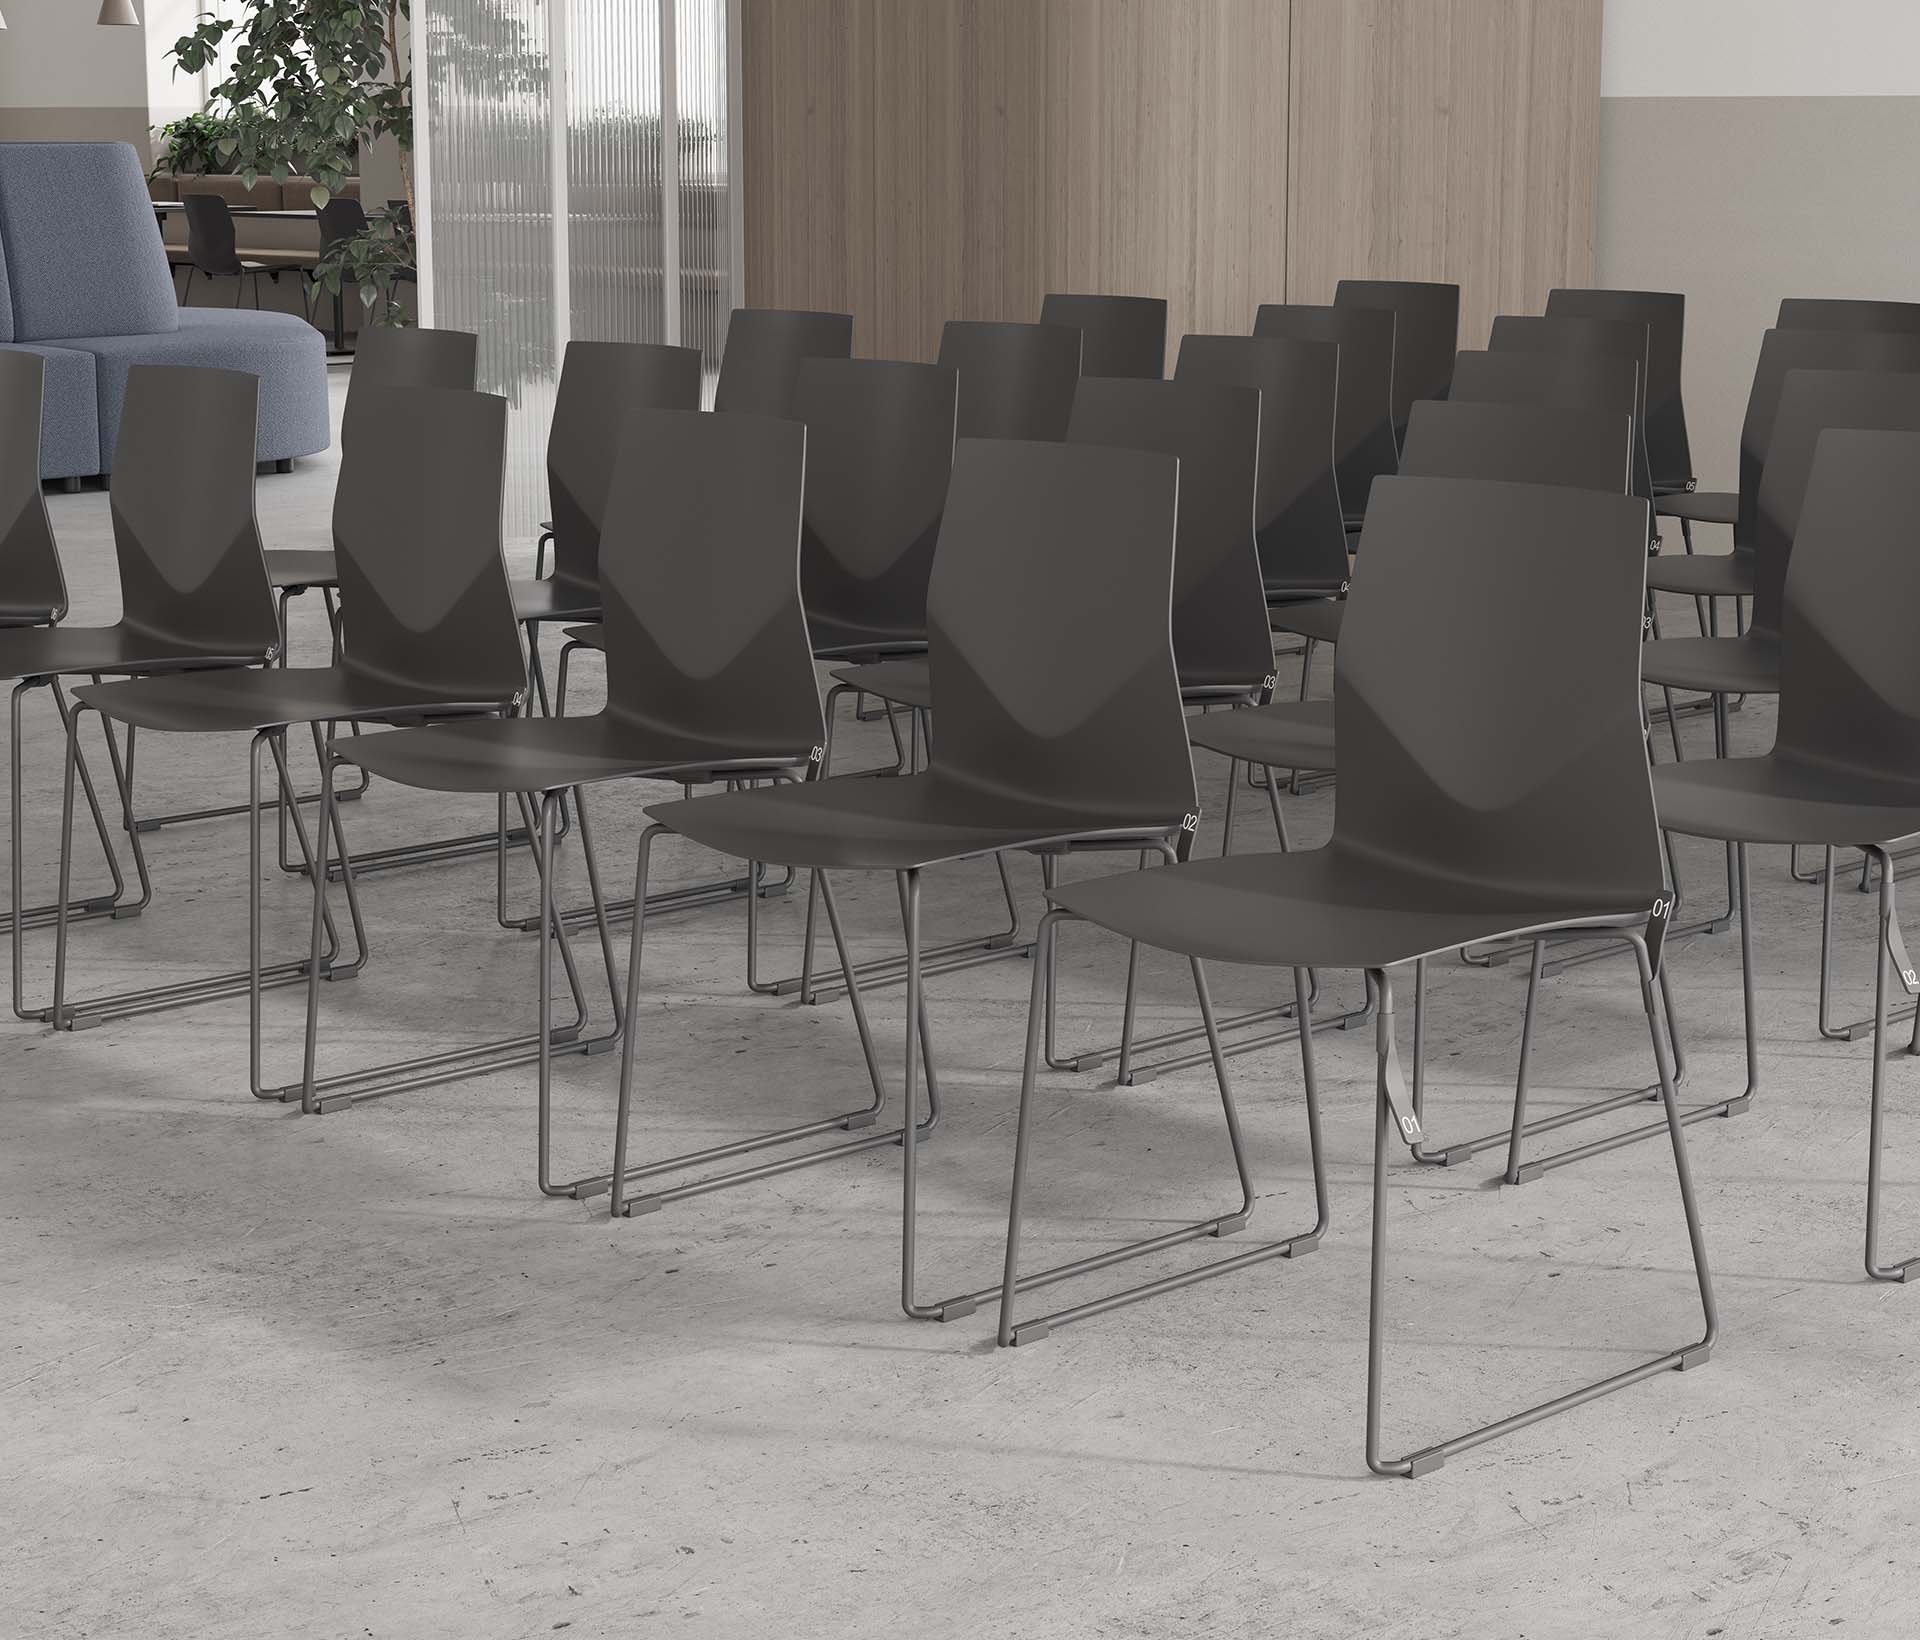 A row of gray chairs in a room.